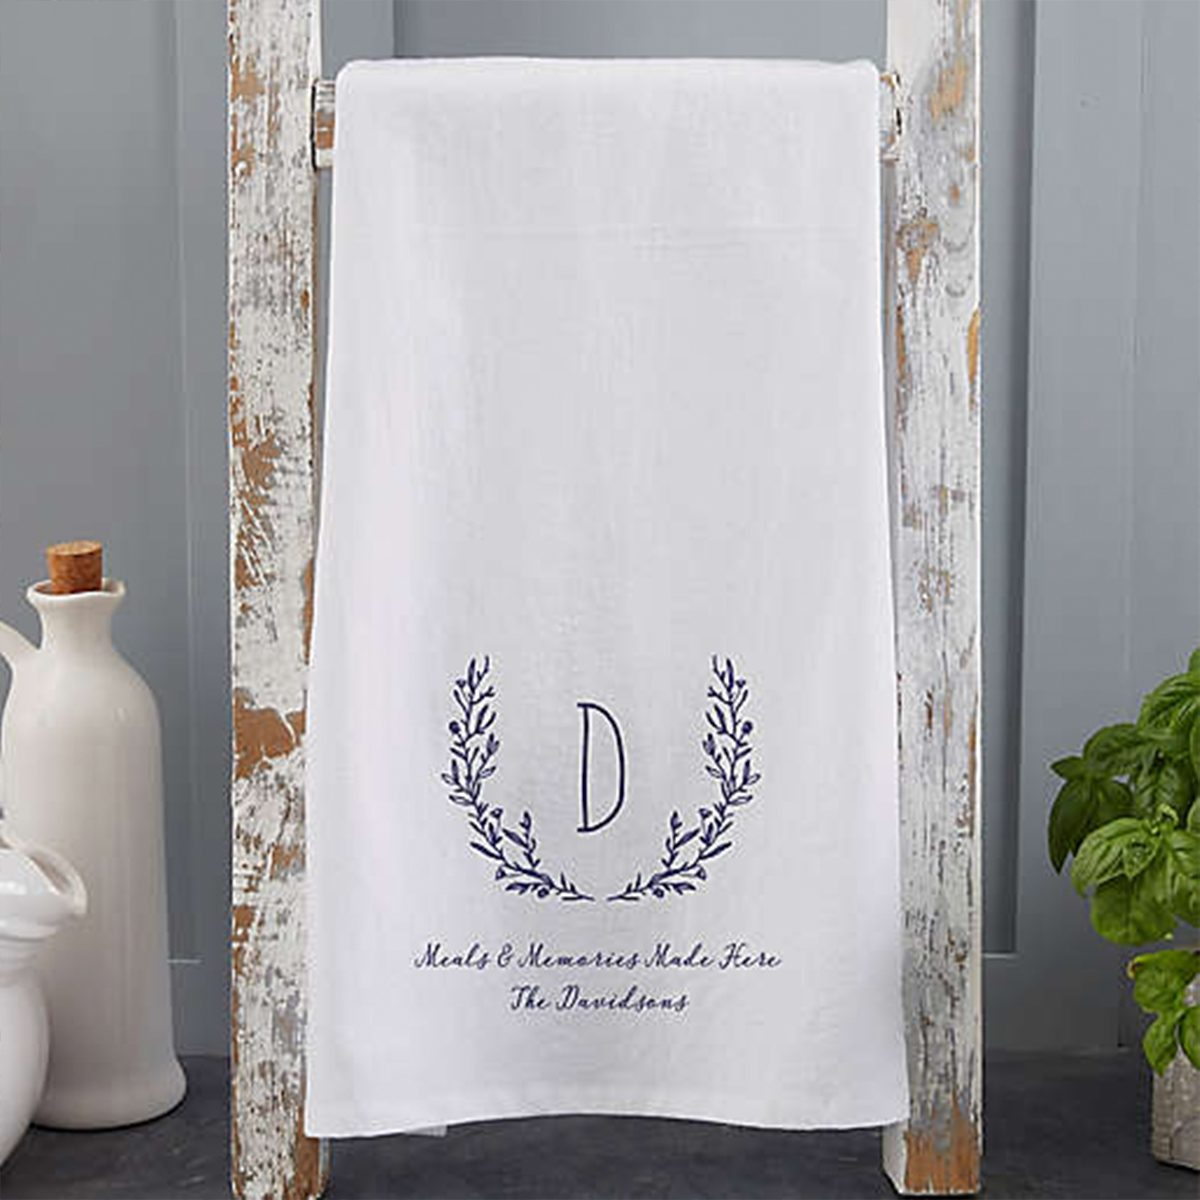 Funny Tea Towels/ Design your own tea towels/personalized kitchen towels